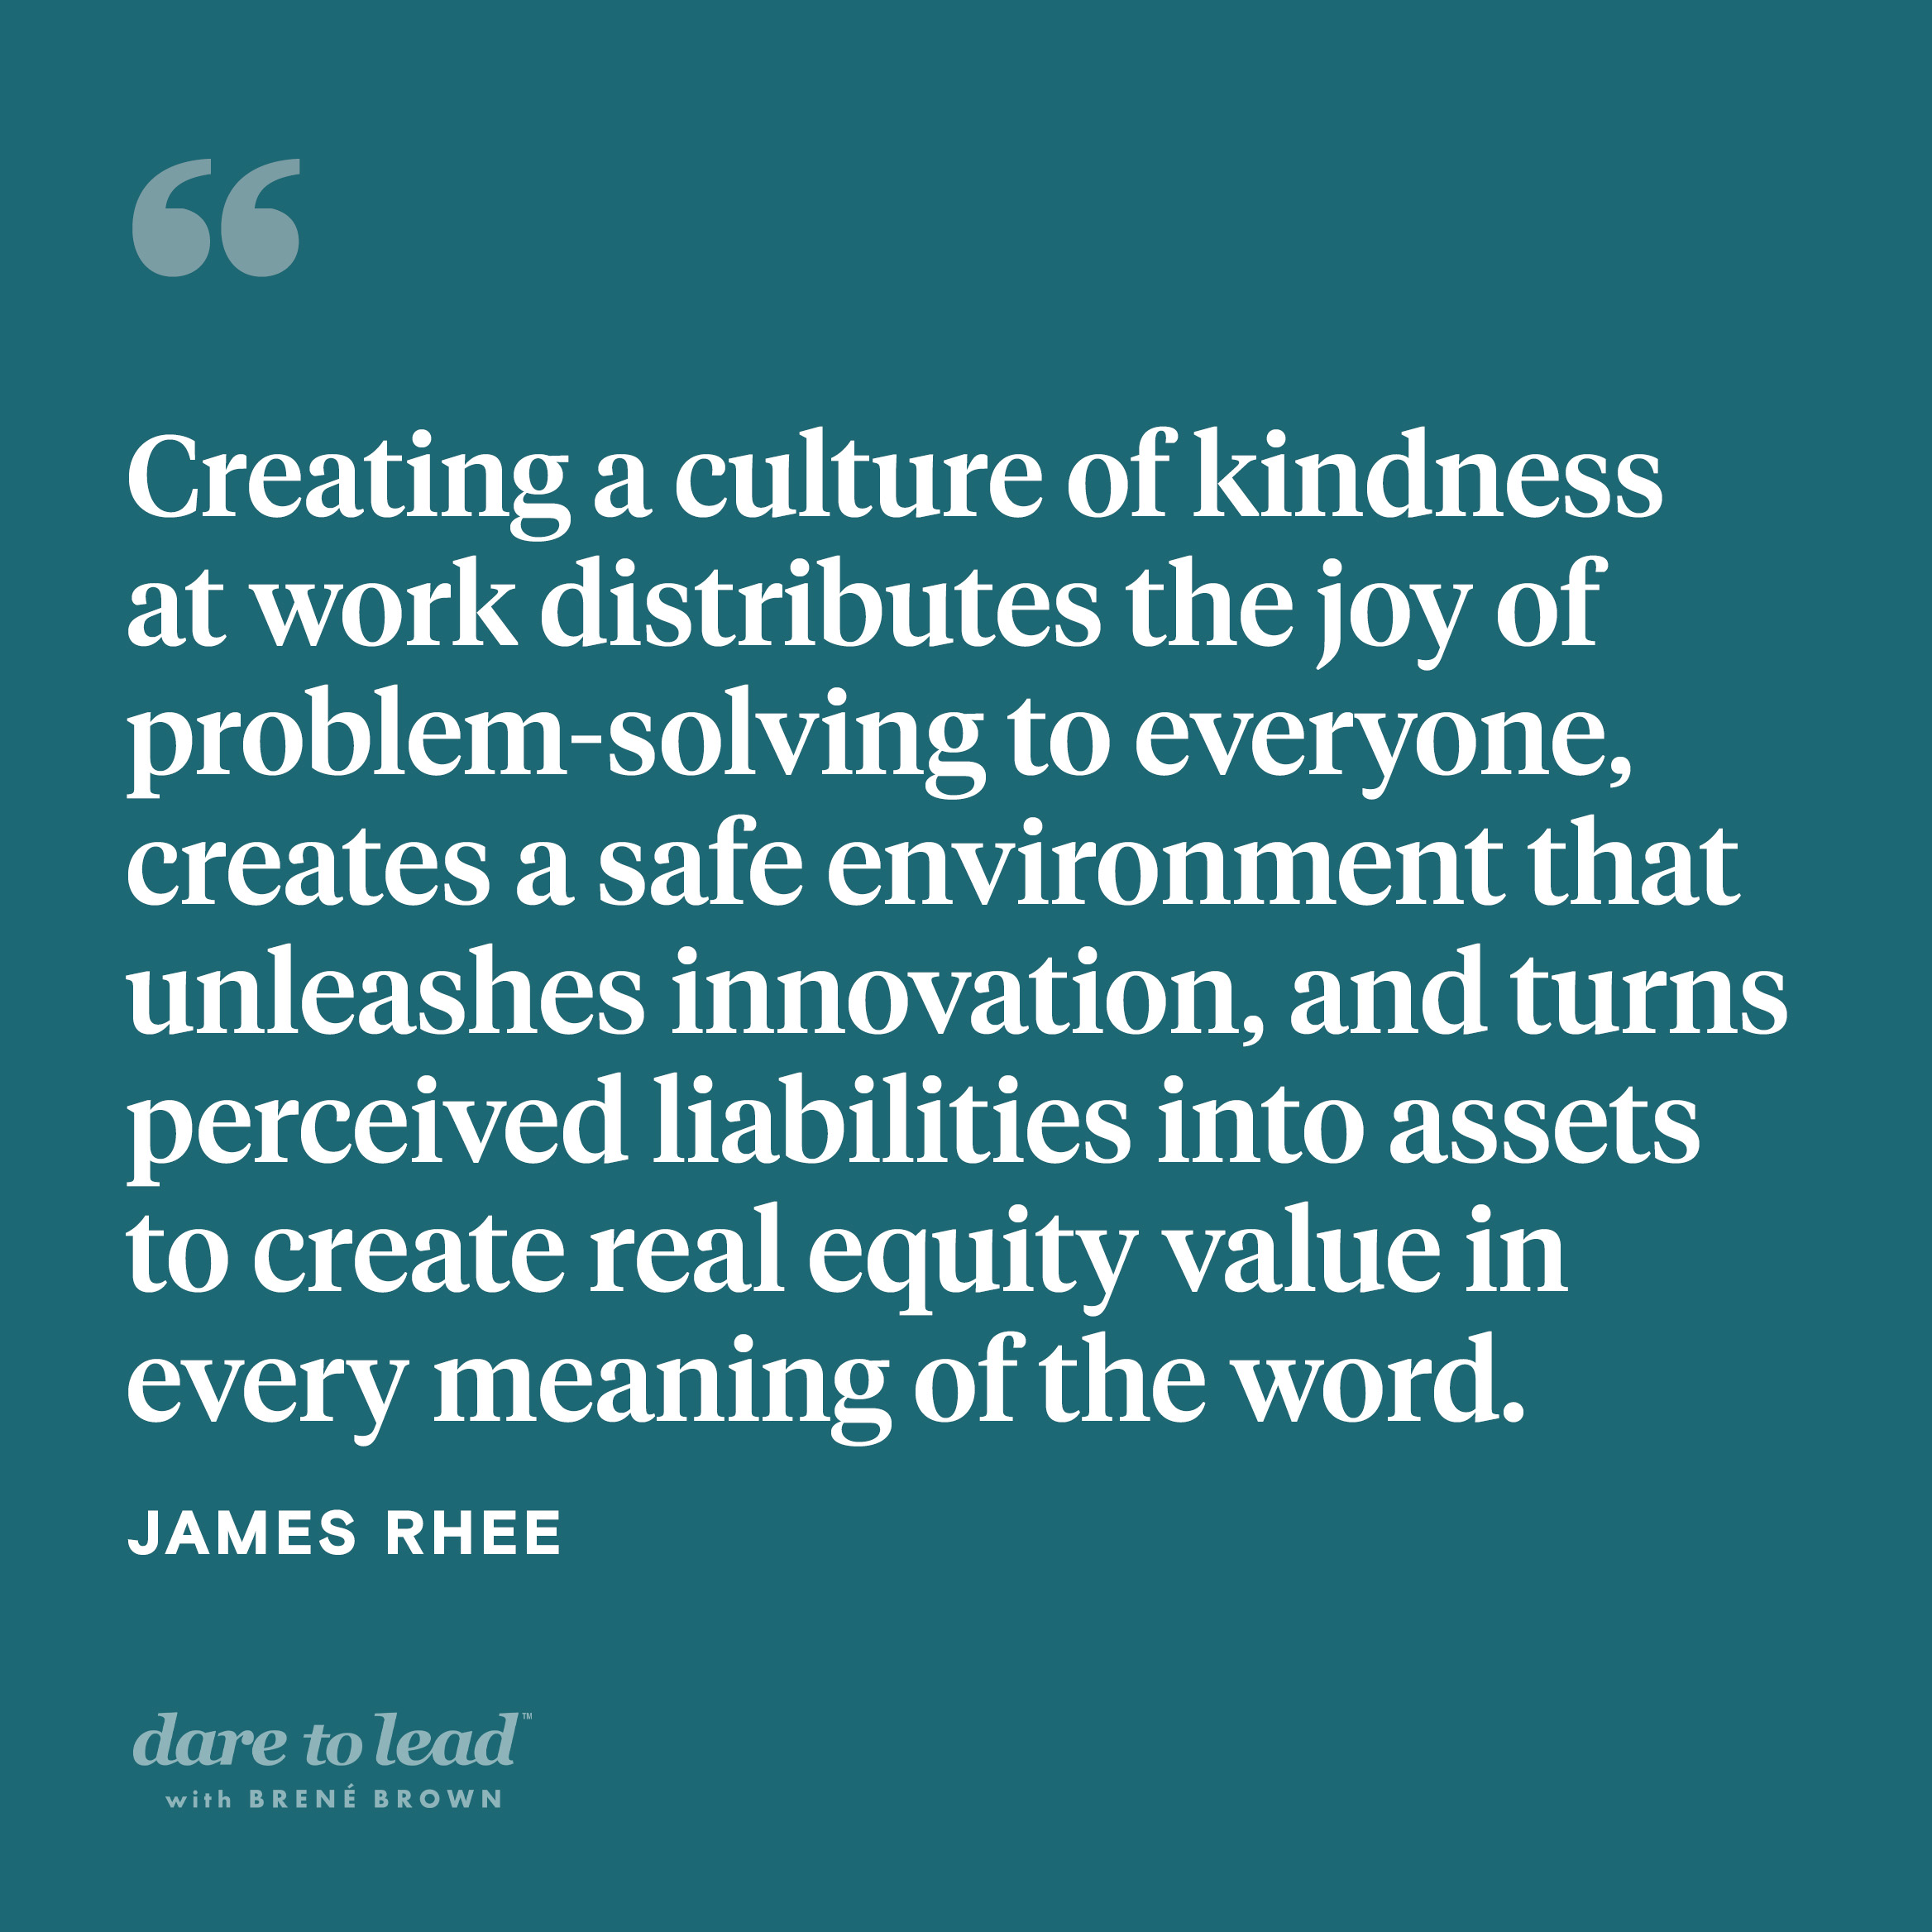 James Rhee on the value of kindness at work: Creating a culture of kindness at work distributes the joy of problem-solving to everyone, creates a safe environment that unleashes innovation, and turns perceived liabilities into assets to create real equity value in every meaning of the word.